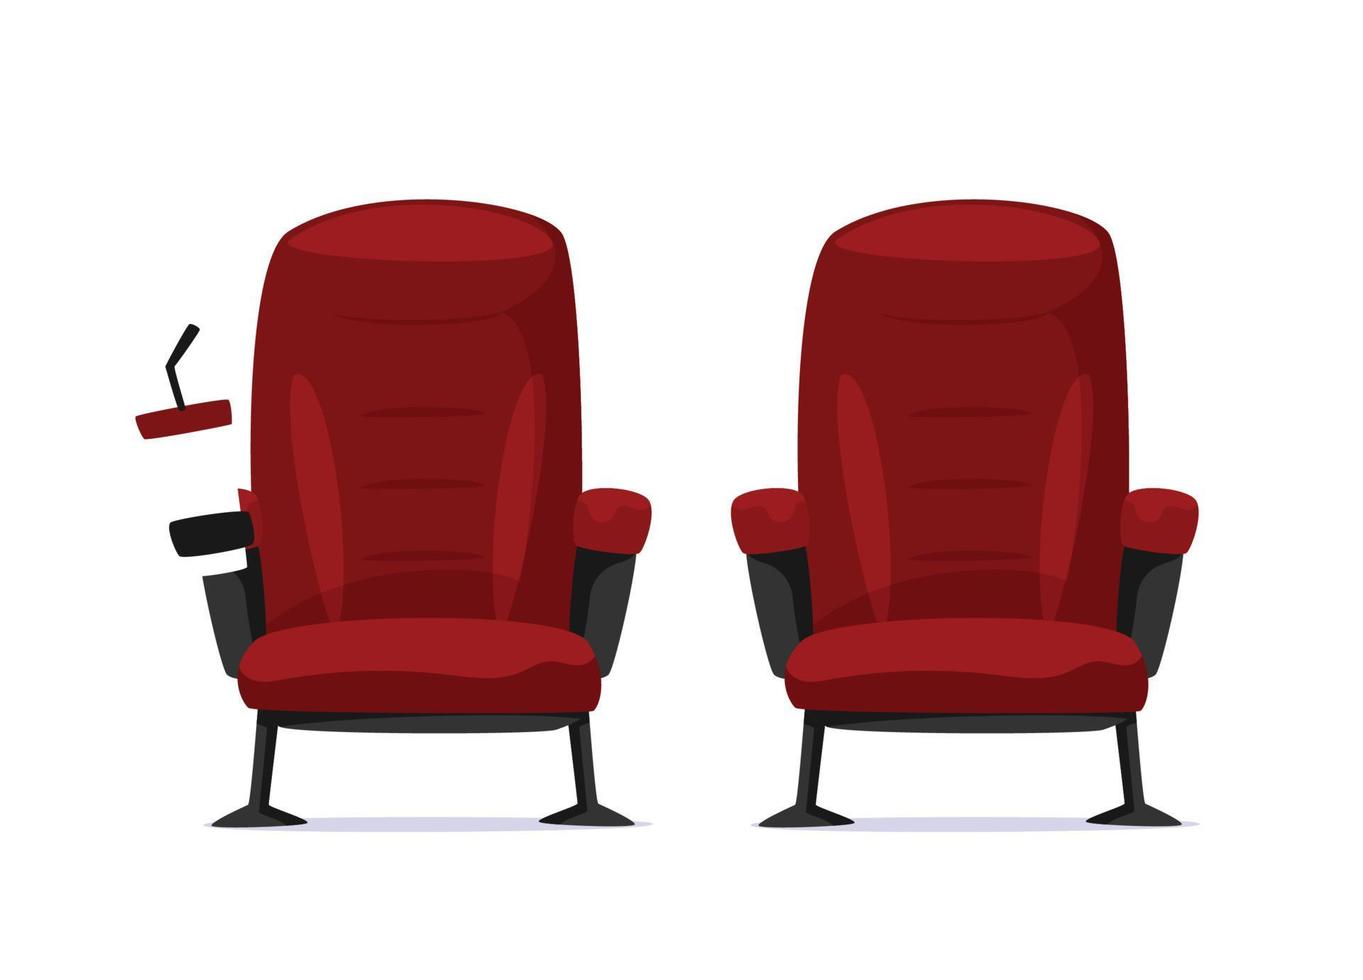 Cinema concept - Front view of red cinema chair vector